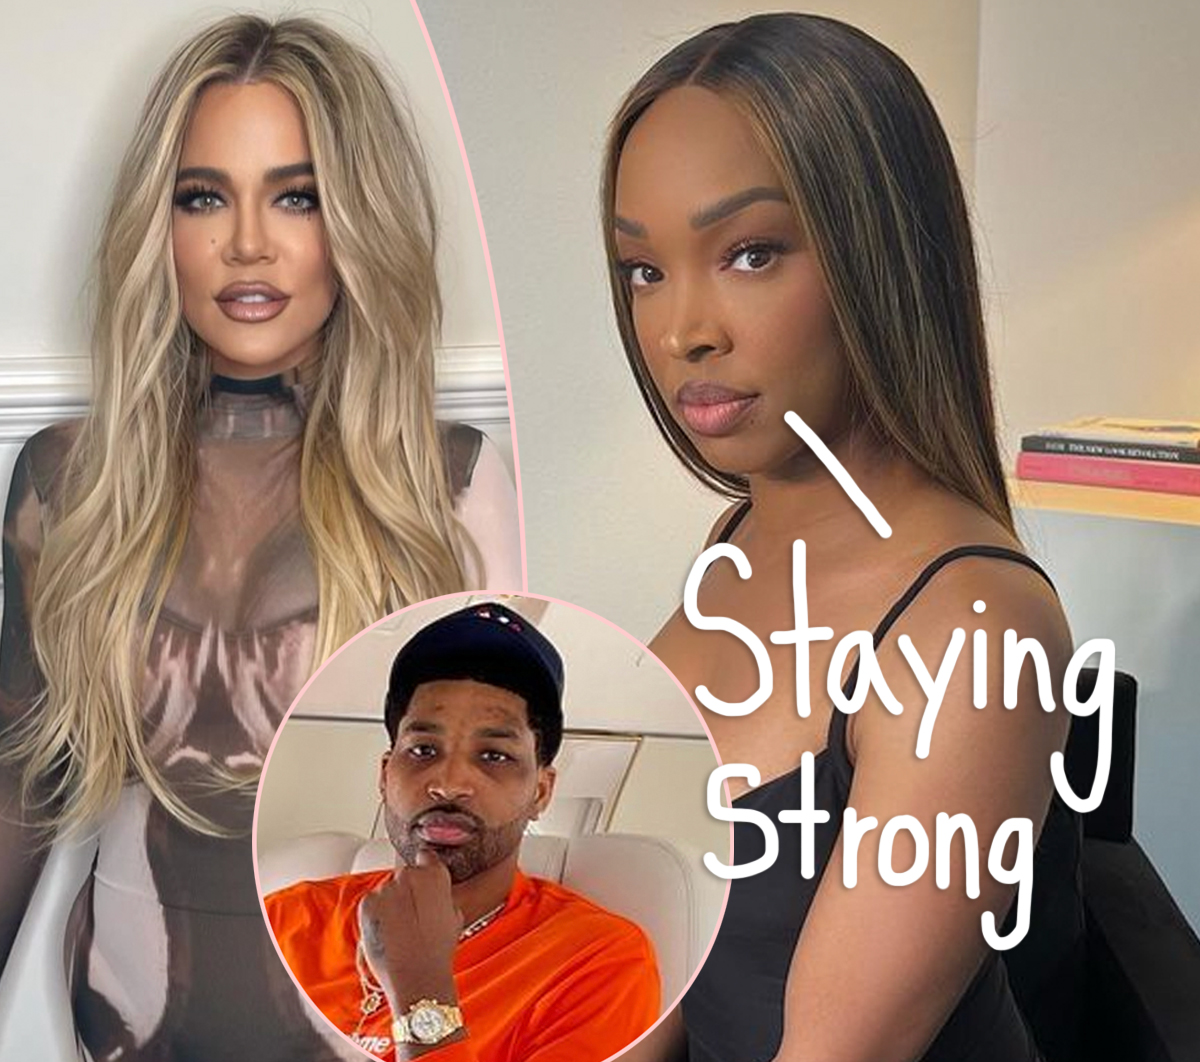 Khloé Kardashians Bff Malika Haqq Shares Update On How Star Is Doing After Tristan Thompson